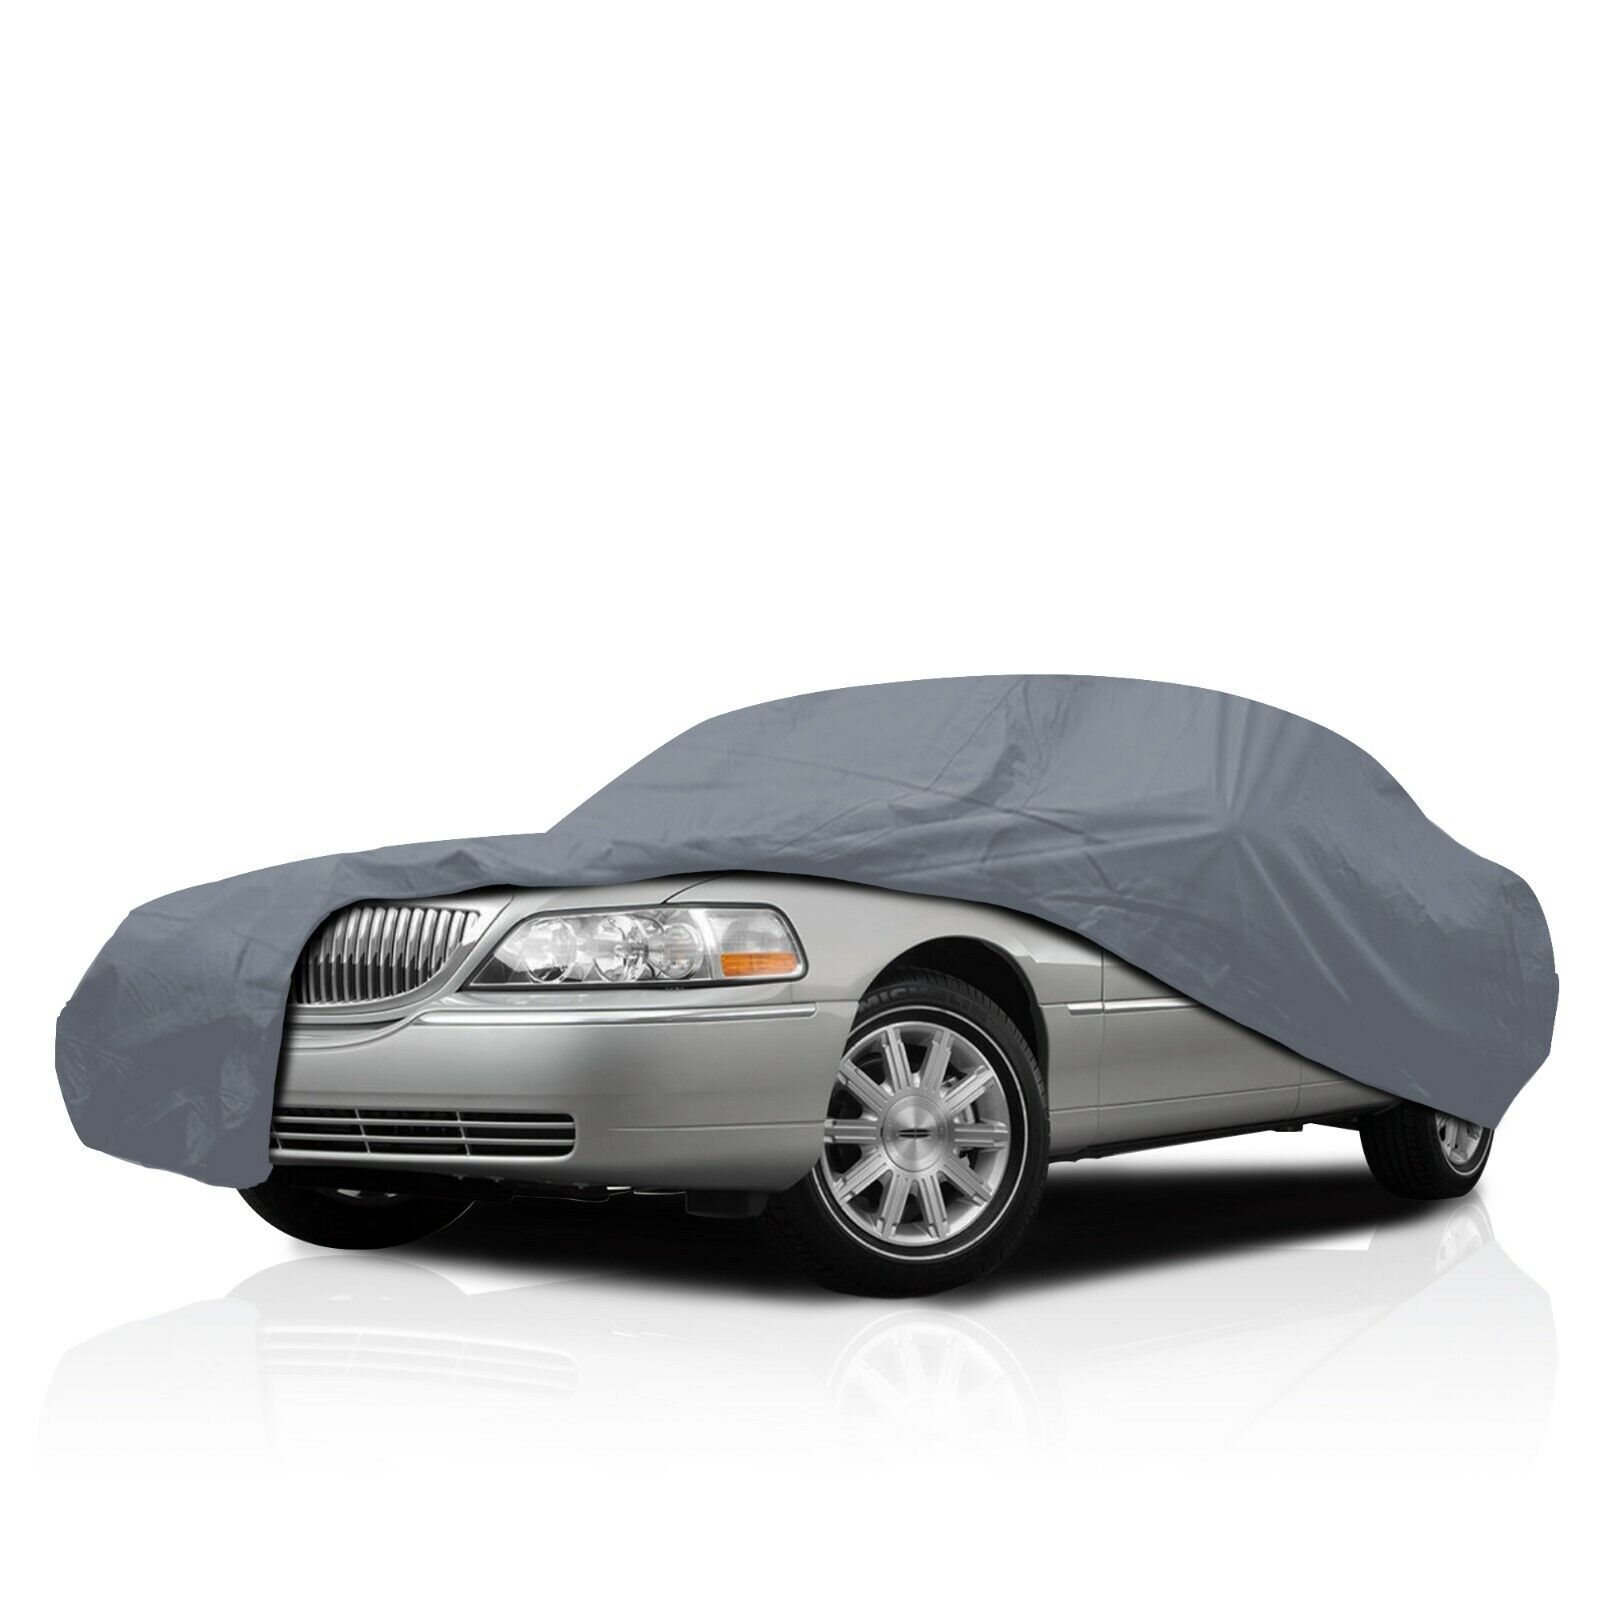 [CCT] 4 Layer Weather/Waterproof Full Car Cover For Lincoln Town Car [1981-2011]